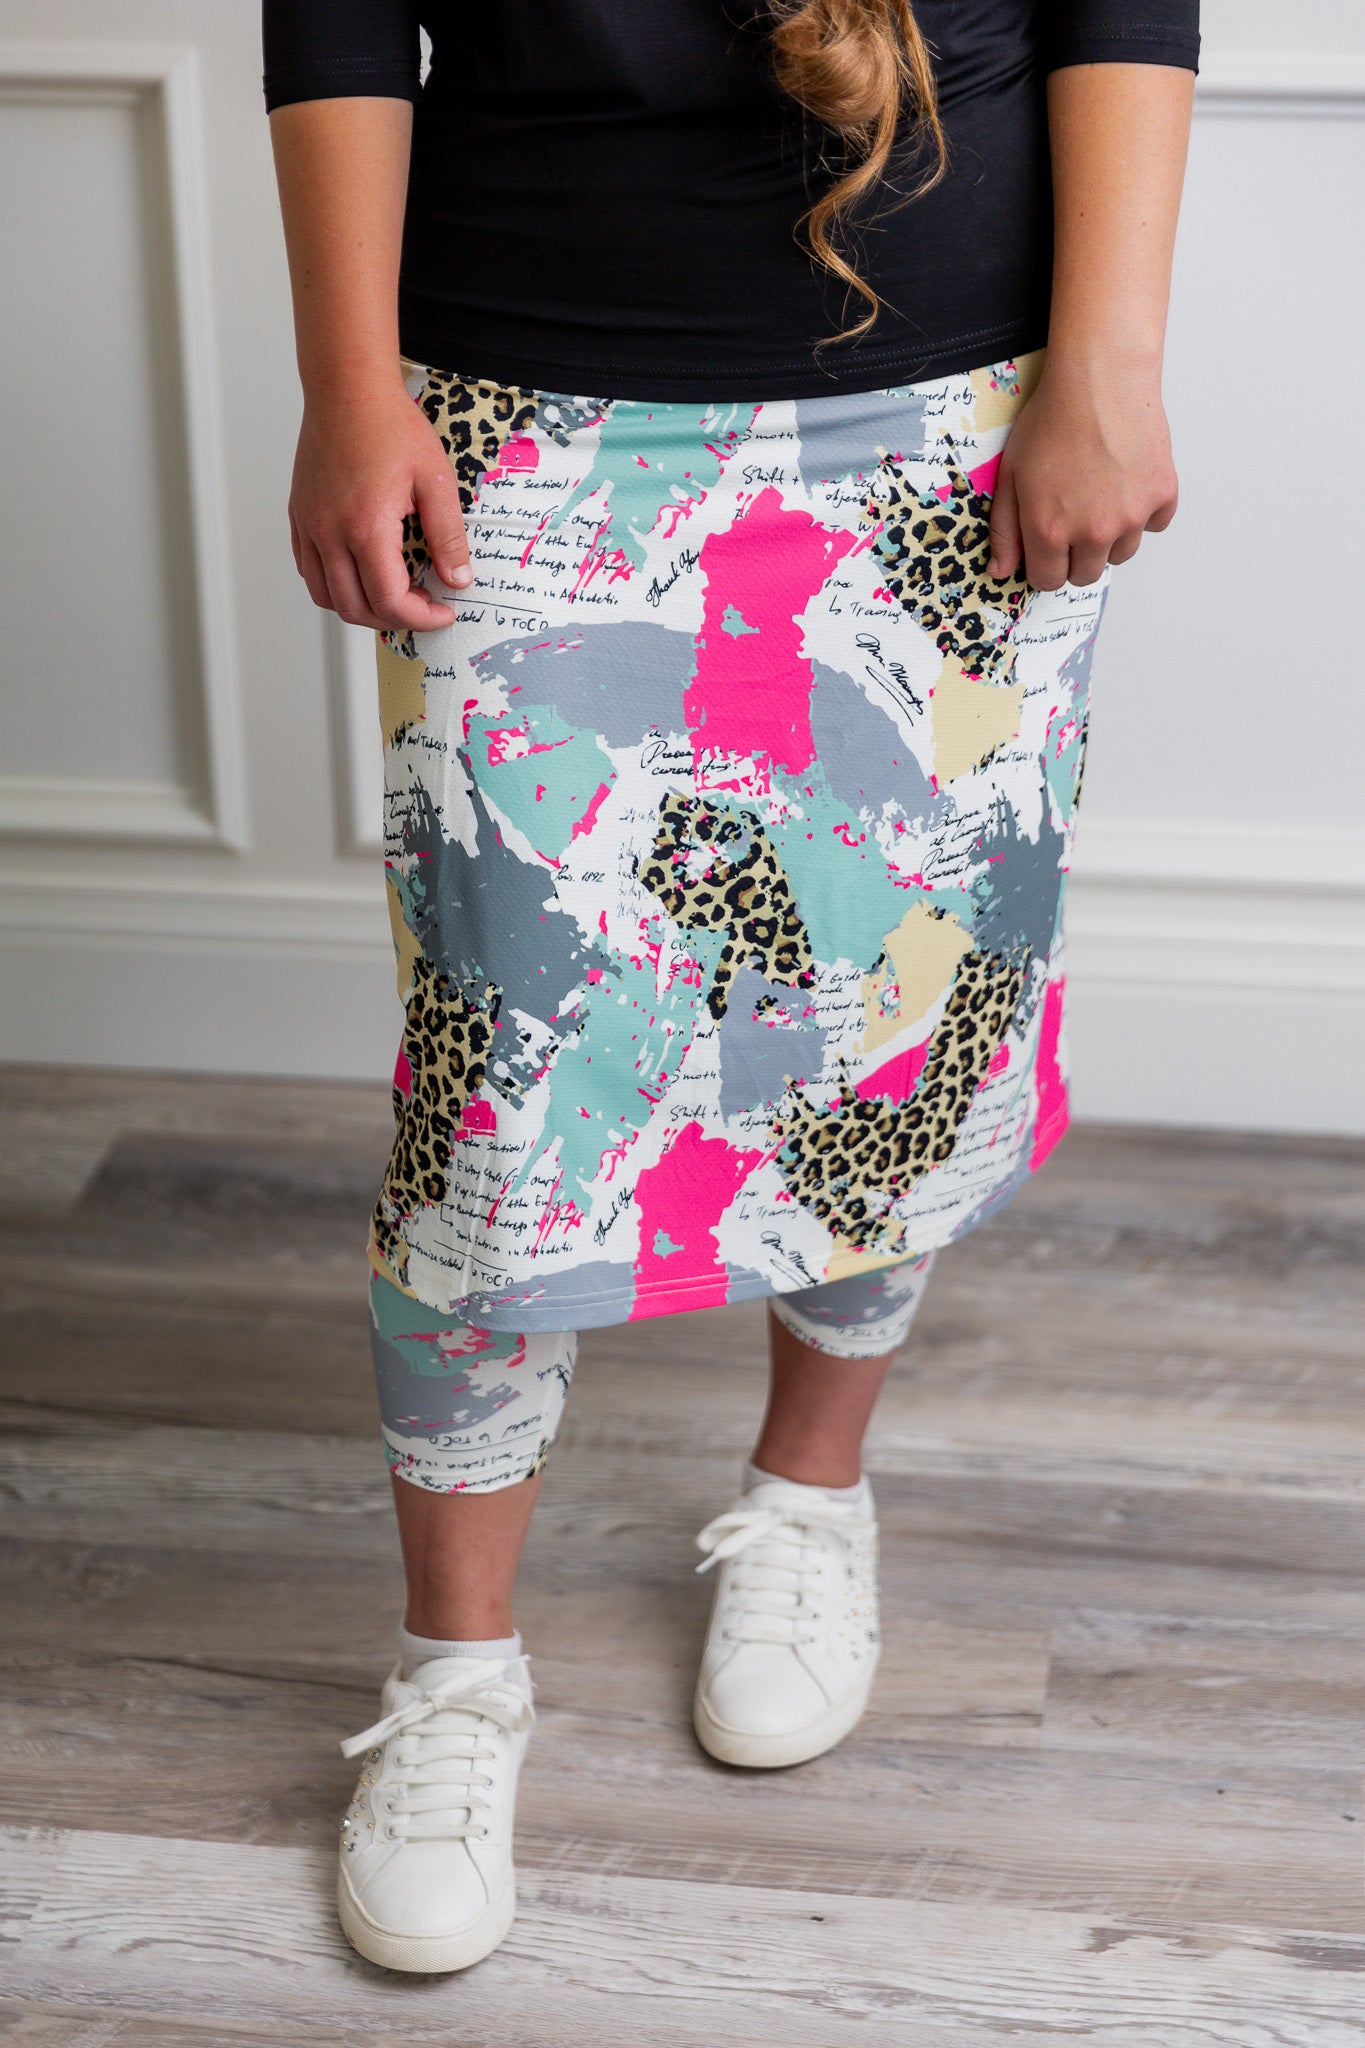 27" modest sports skirt solid print colors